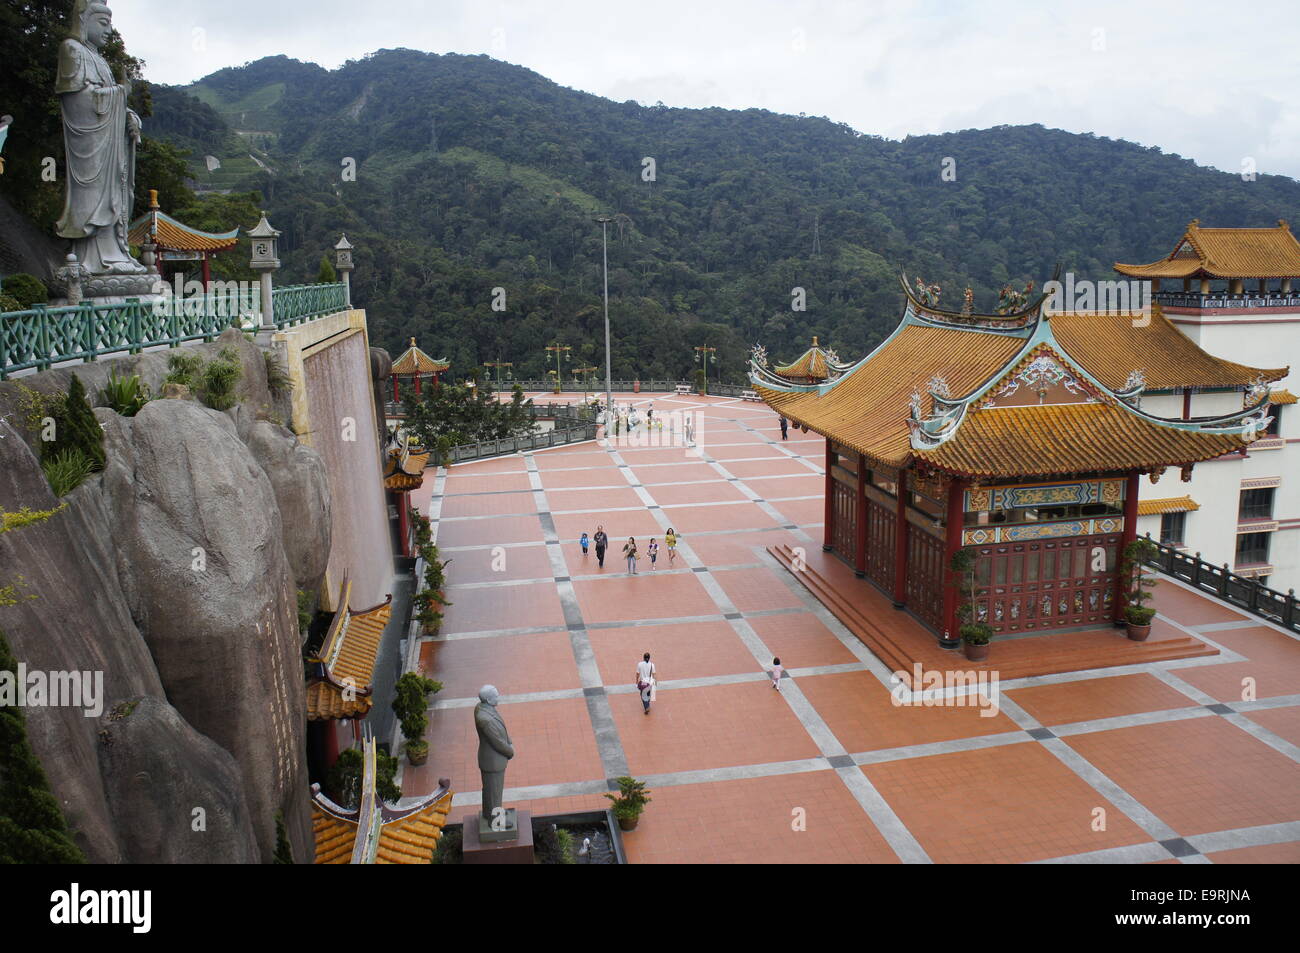 Chin Swee Tempel, Genting Highlands, Malaysia Stockfoto